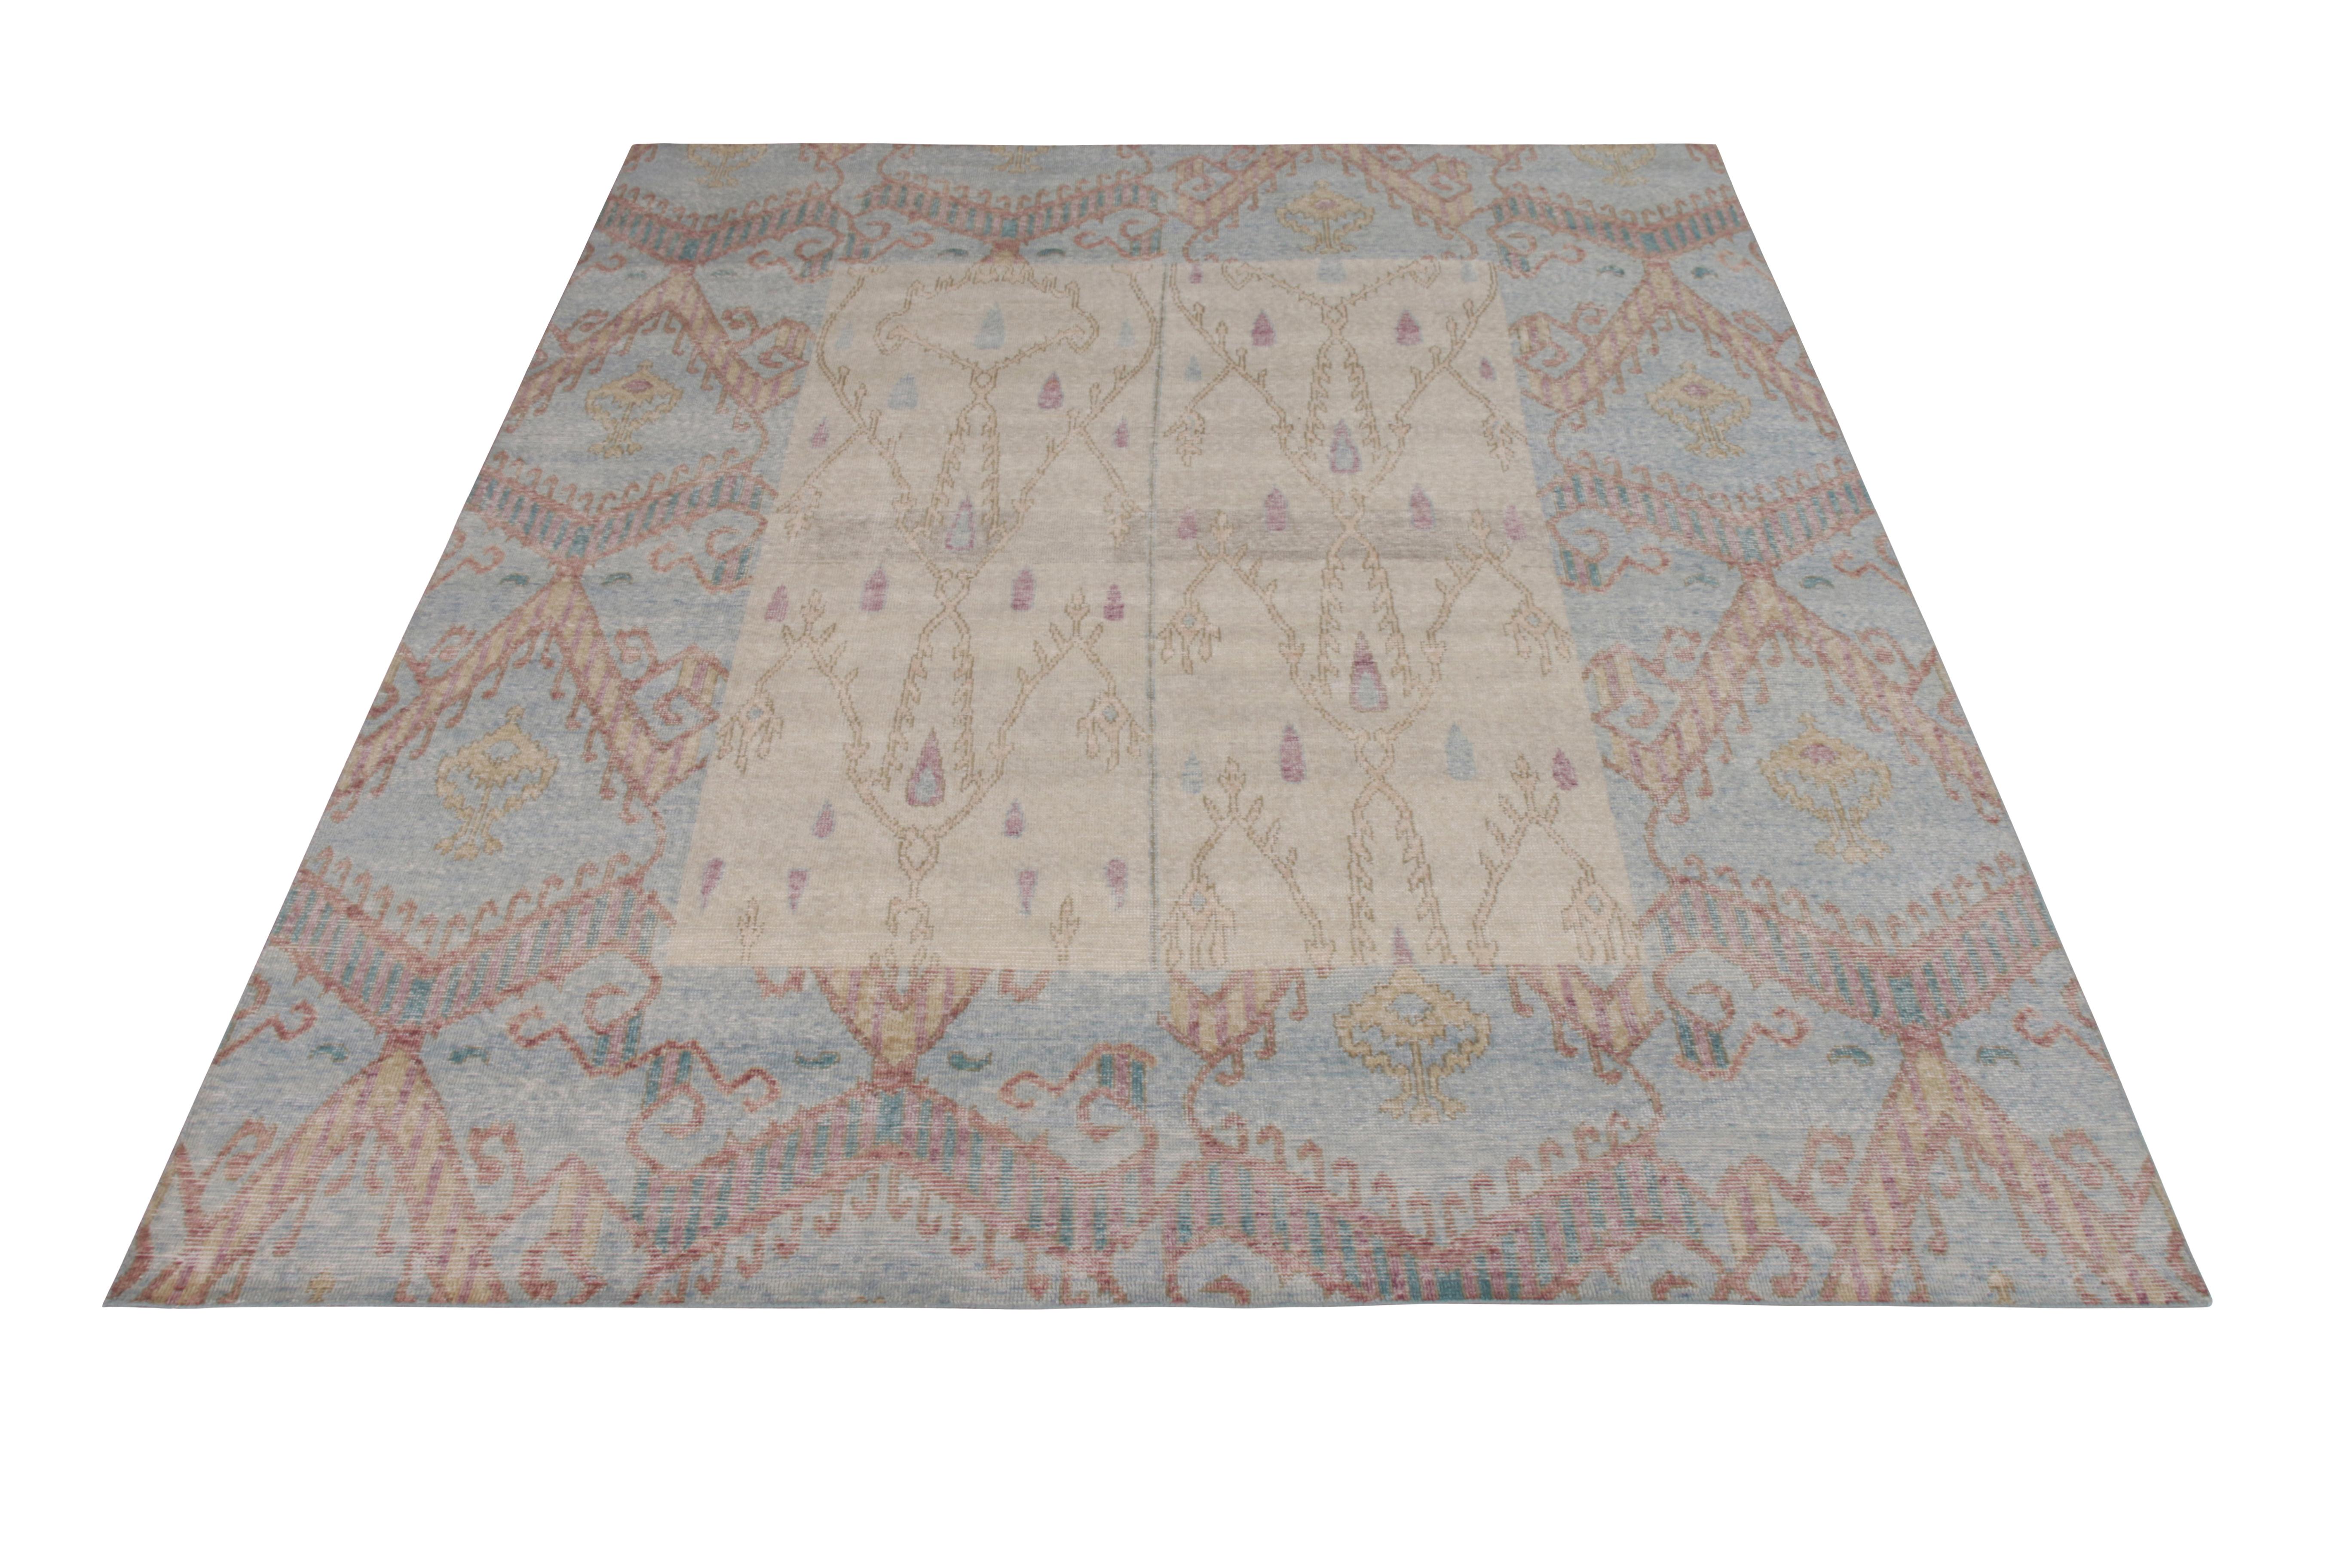 A beige and blue ode to the silk weaving of Ikats joining the Homage collection by Rug & Kilim. 

On the design: Hand knotted in wool, the execution of pattern in this 8 x 10 is among Josh’s favorites in the line. Furthermore this piece